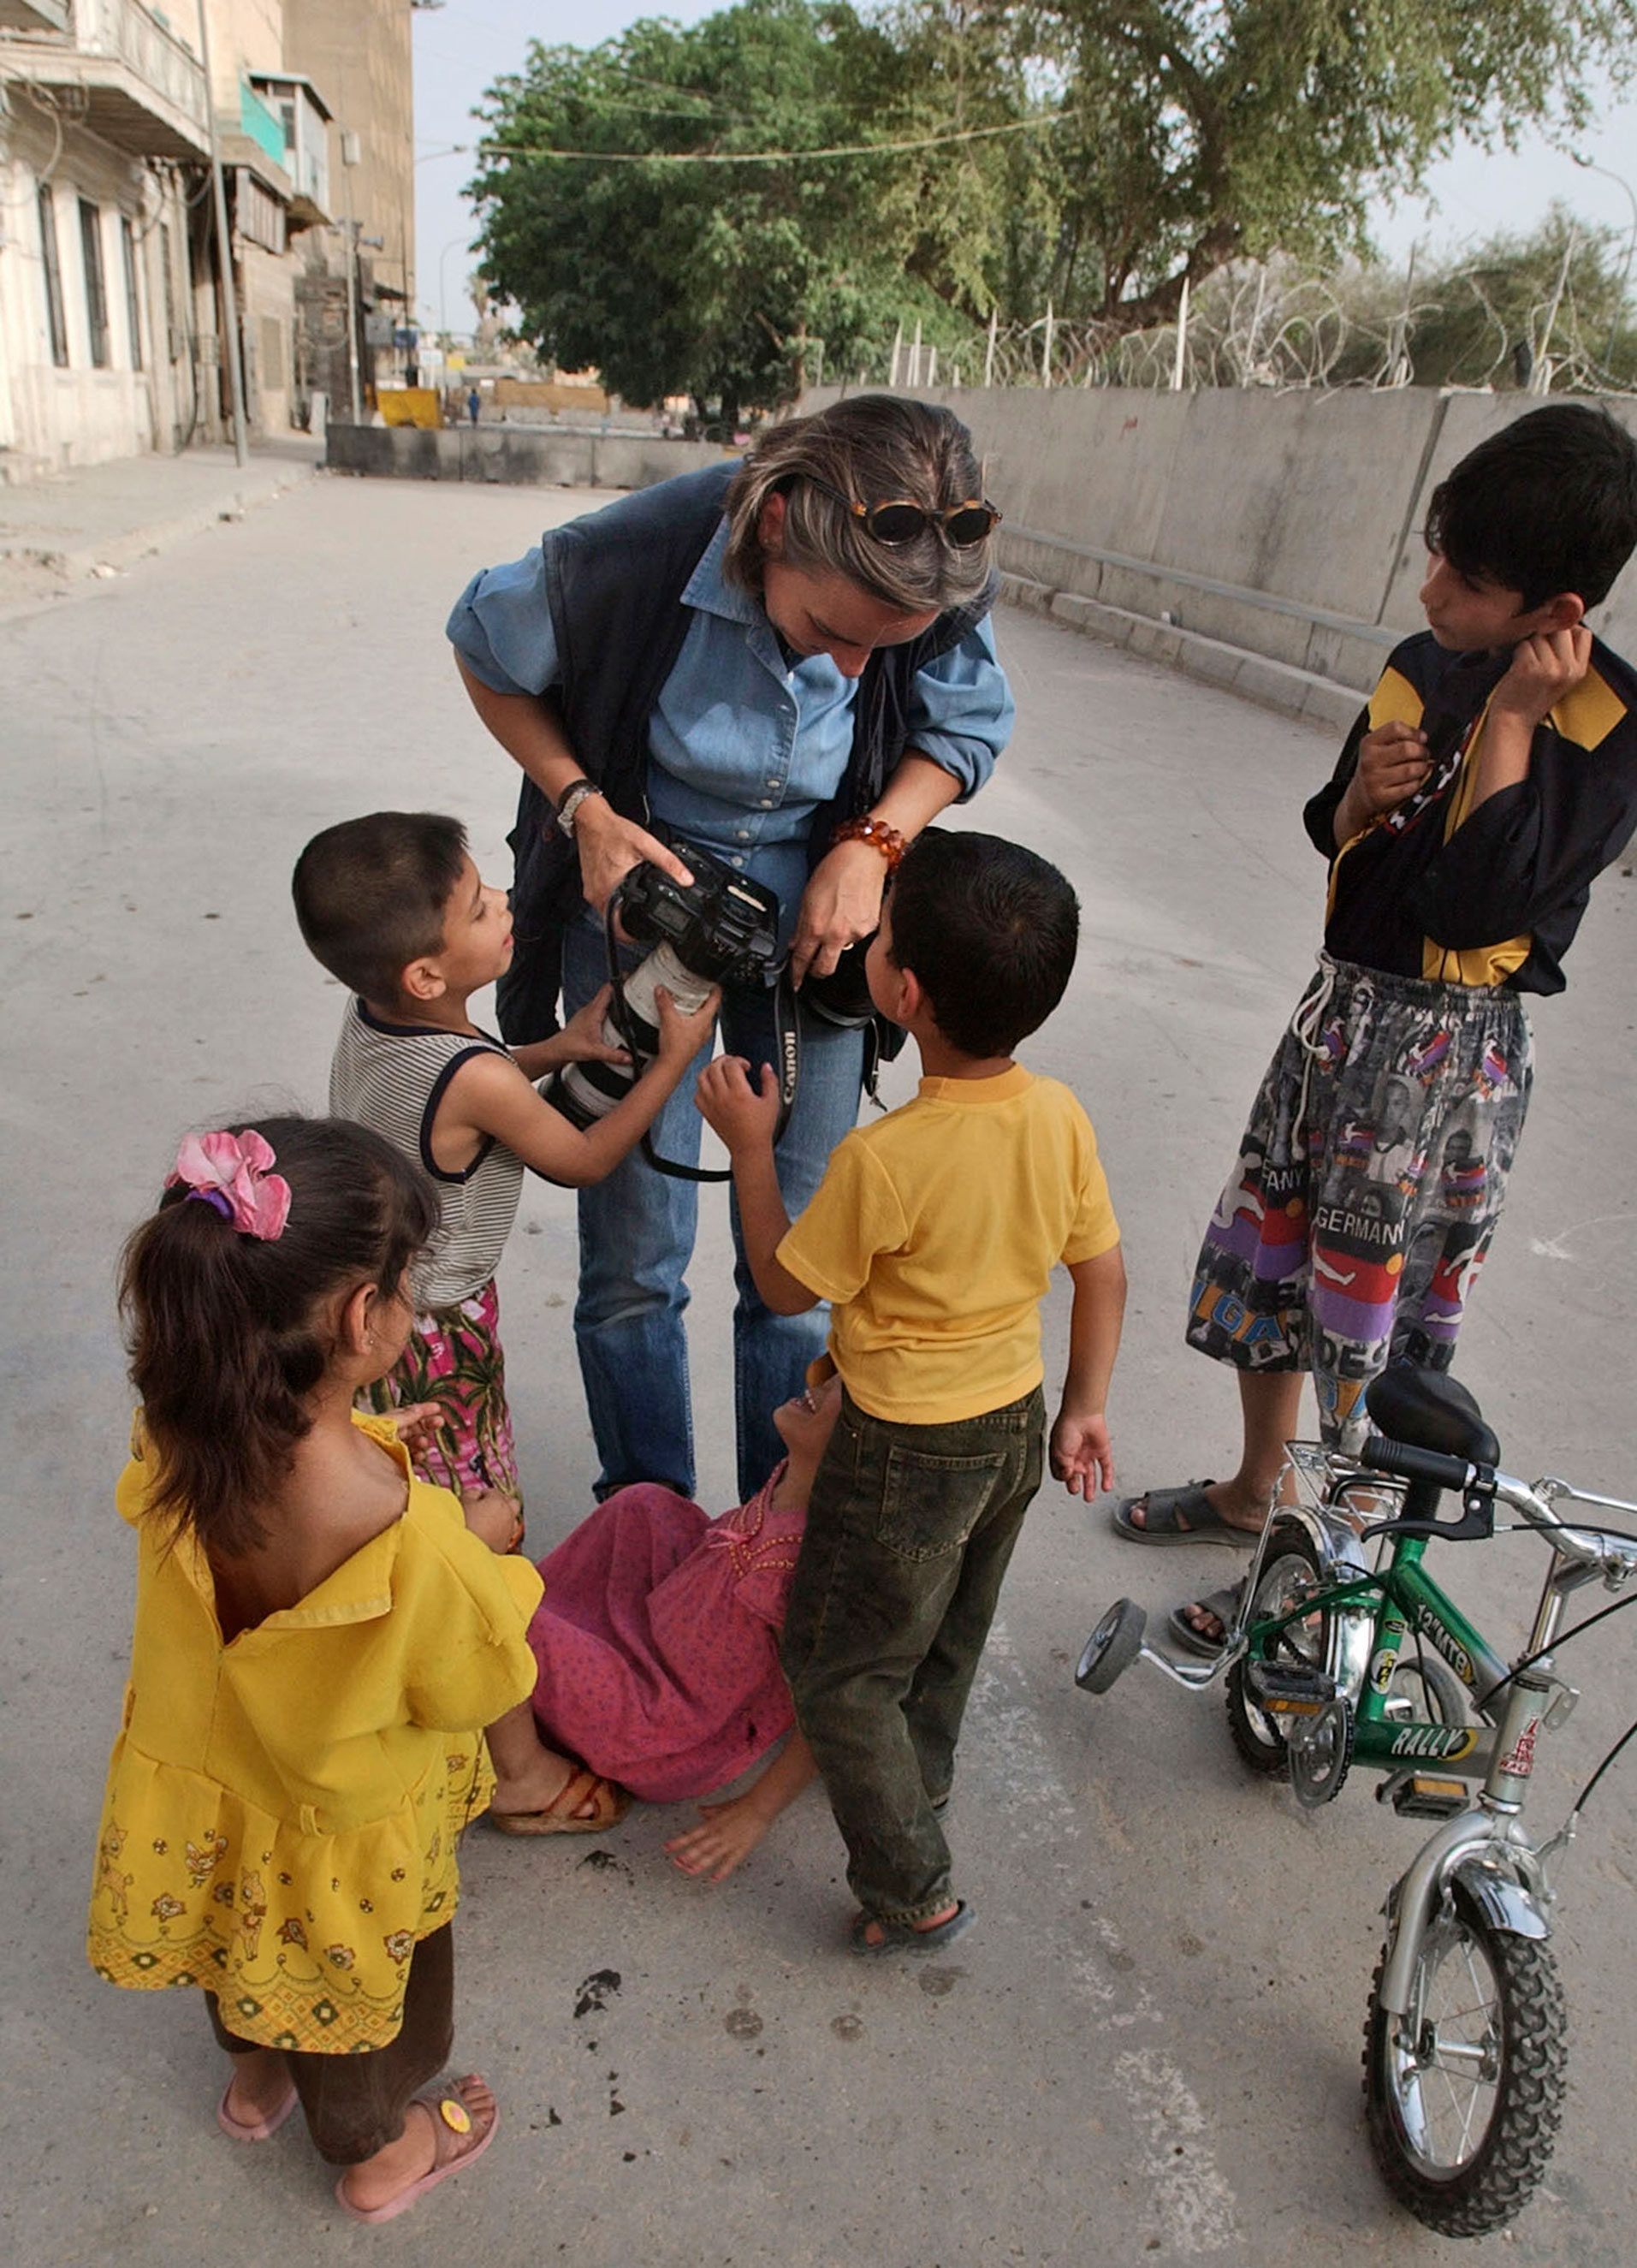 Anja Niedringhaus shows Iraqi children their pictures in Baghdad in 2004.